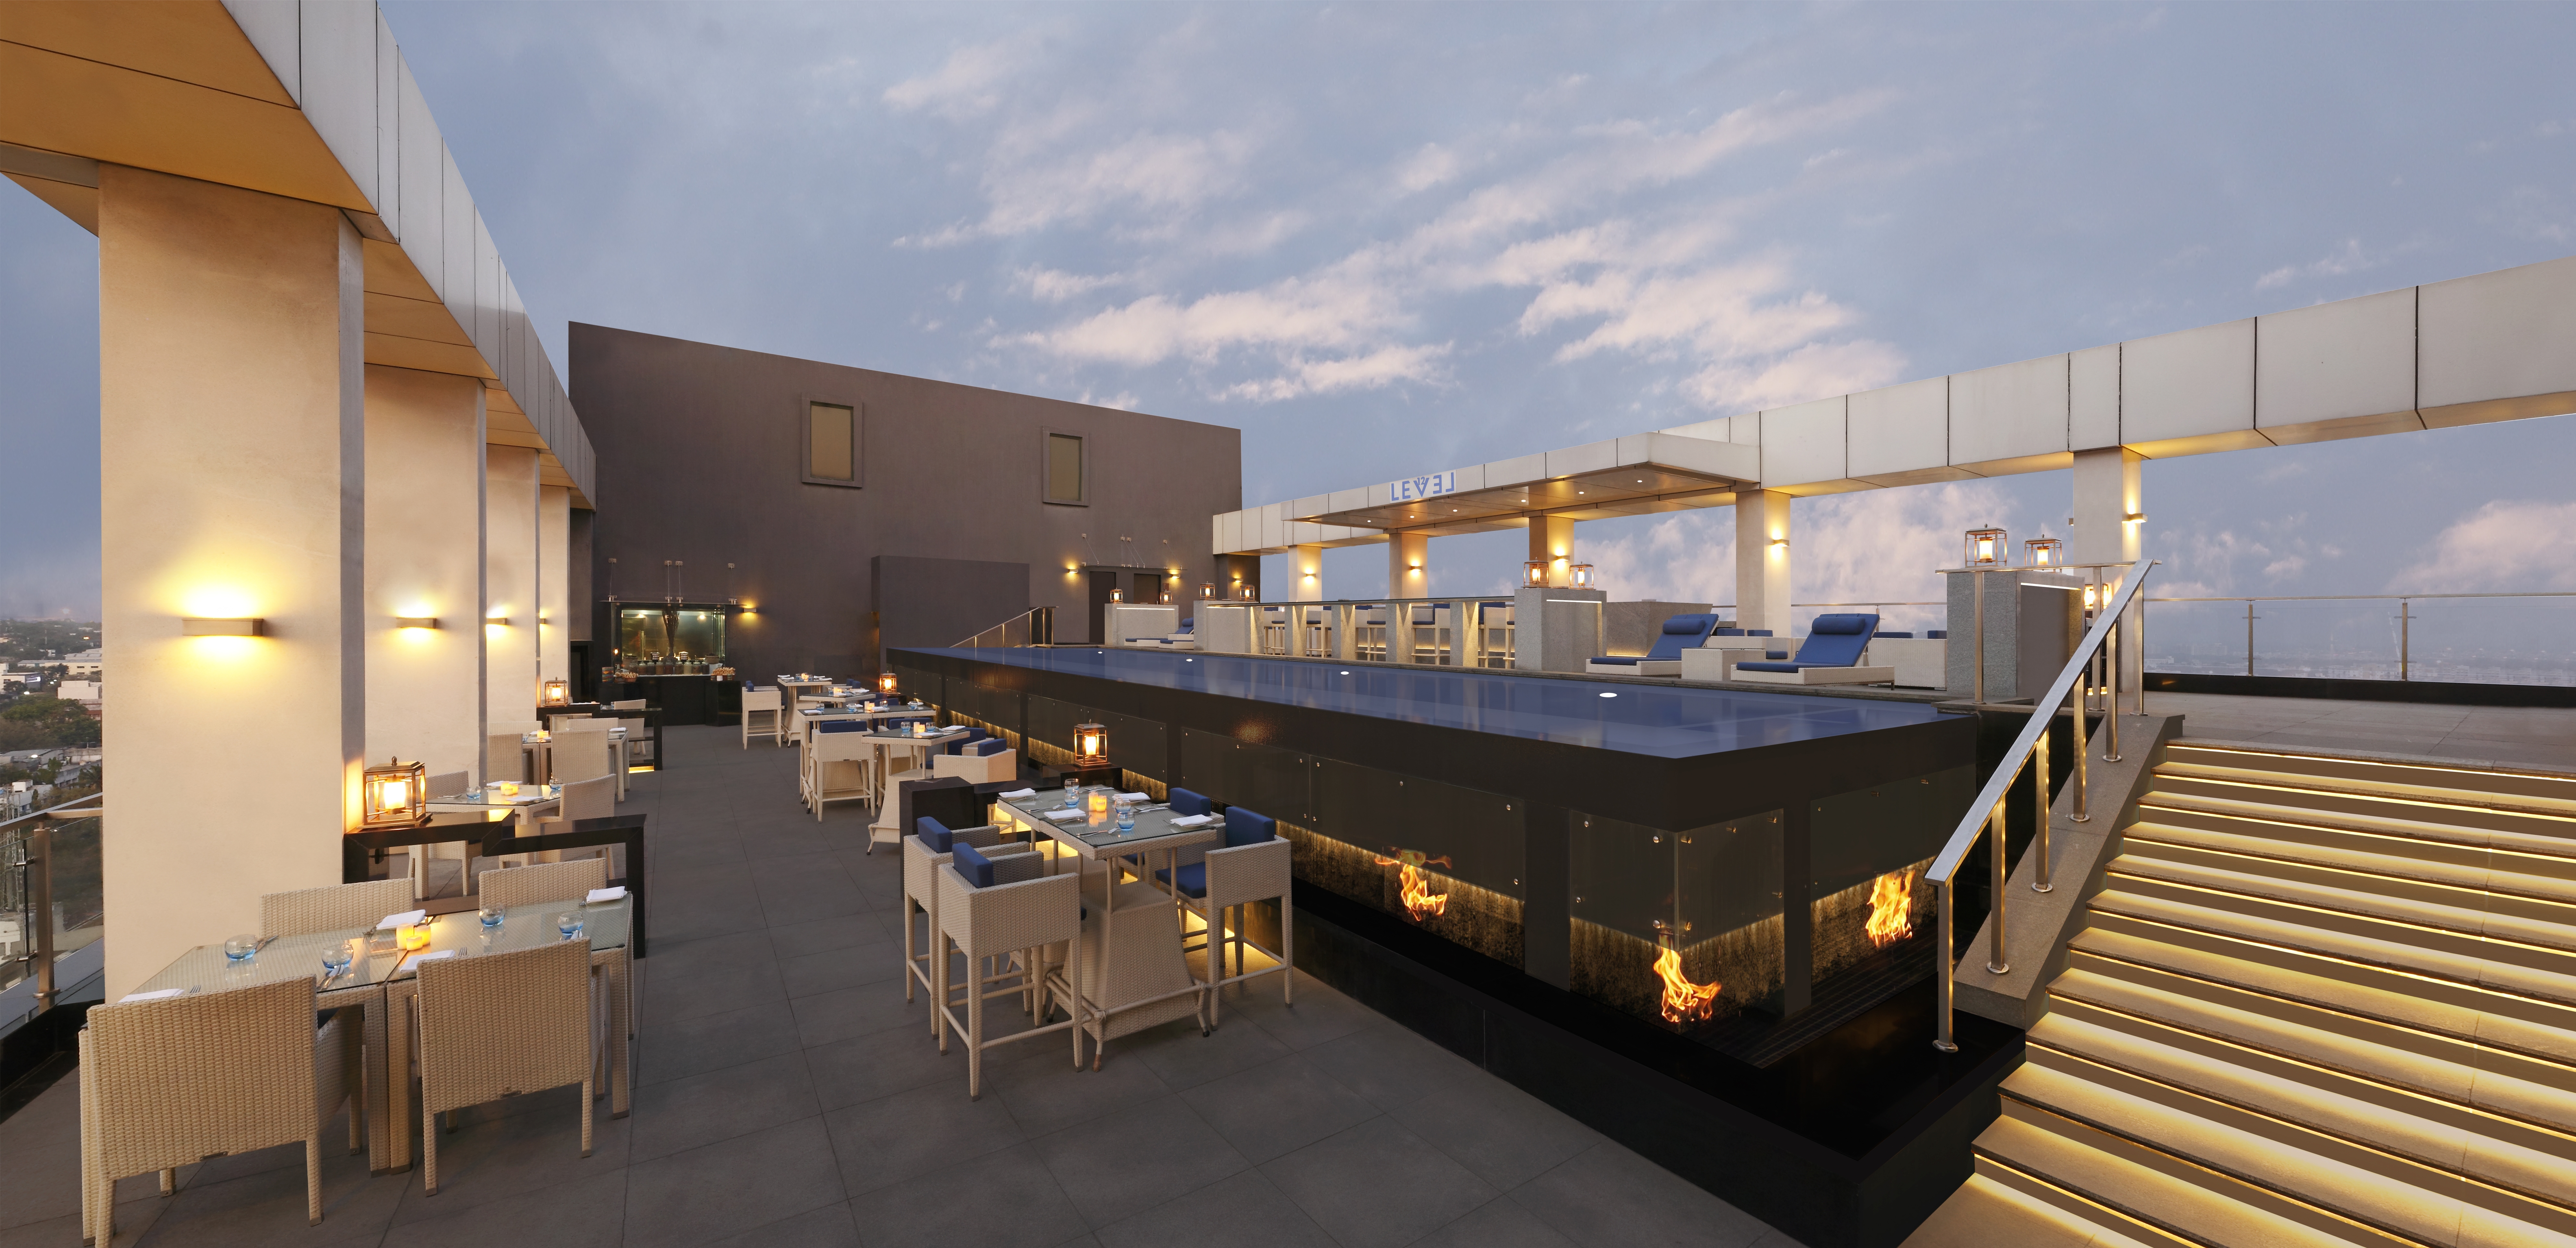 Loungers by Rooftop Swimming Pool and Staircase Down to Candlelit Tables and Chairs by Large Windows in Lounge Area